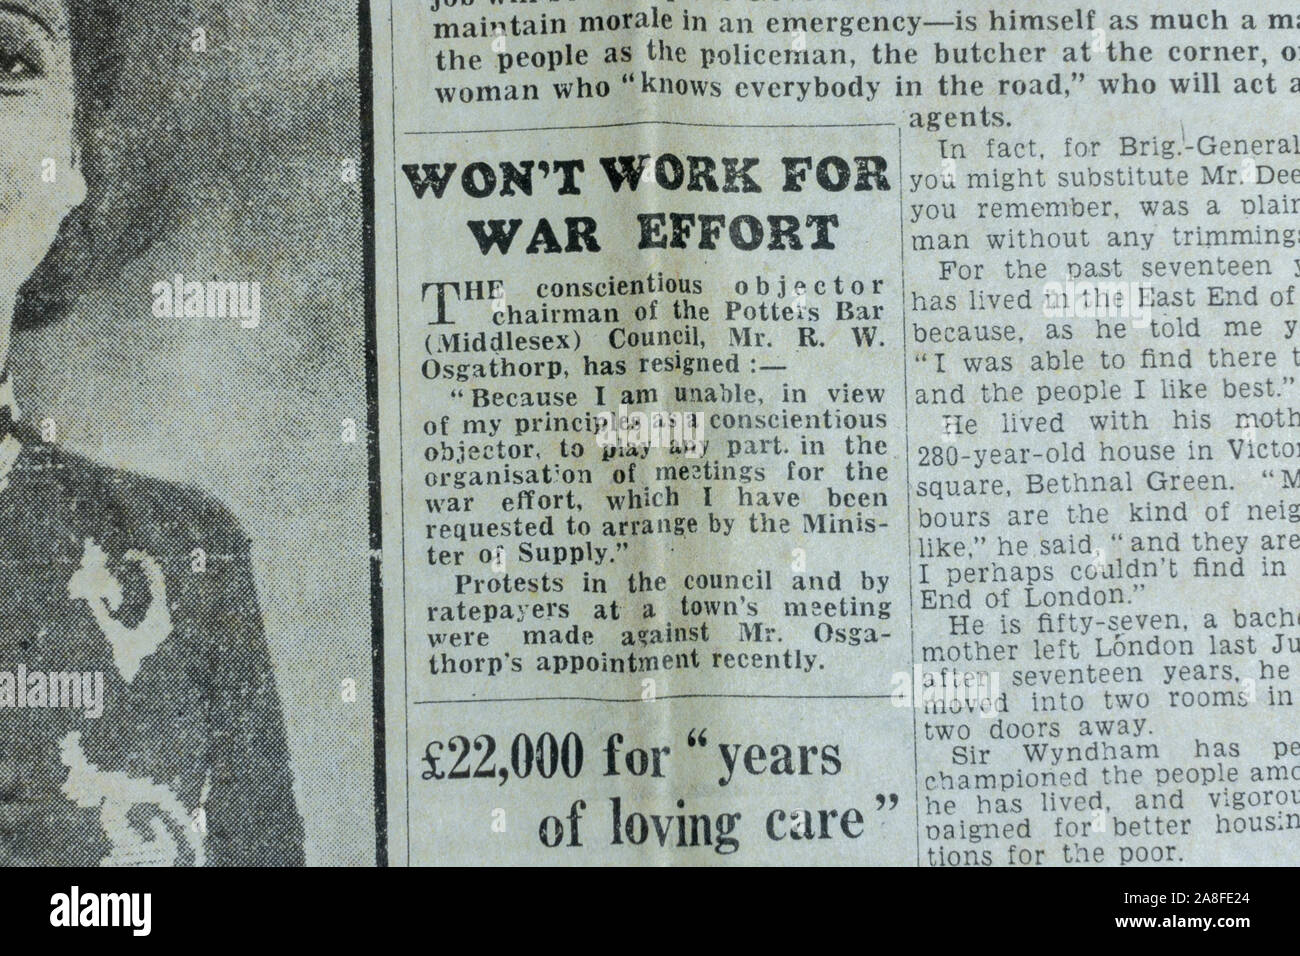 Report of a conscientious objector resigning from a local government council in the Daily Express newspaper (replica) on 31st May 1940. Stock Photo